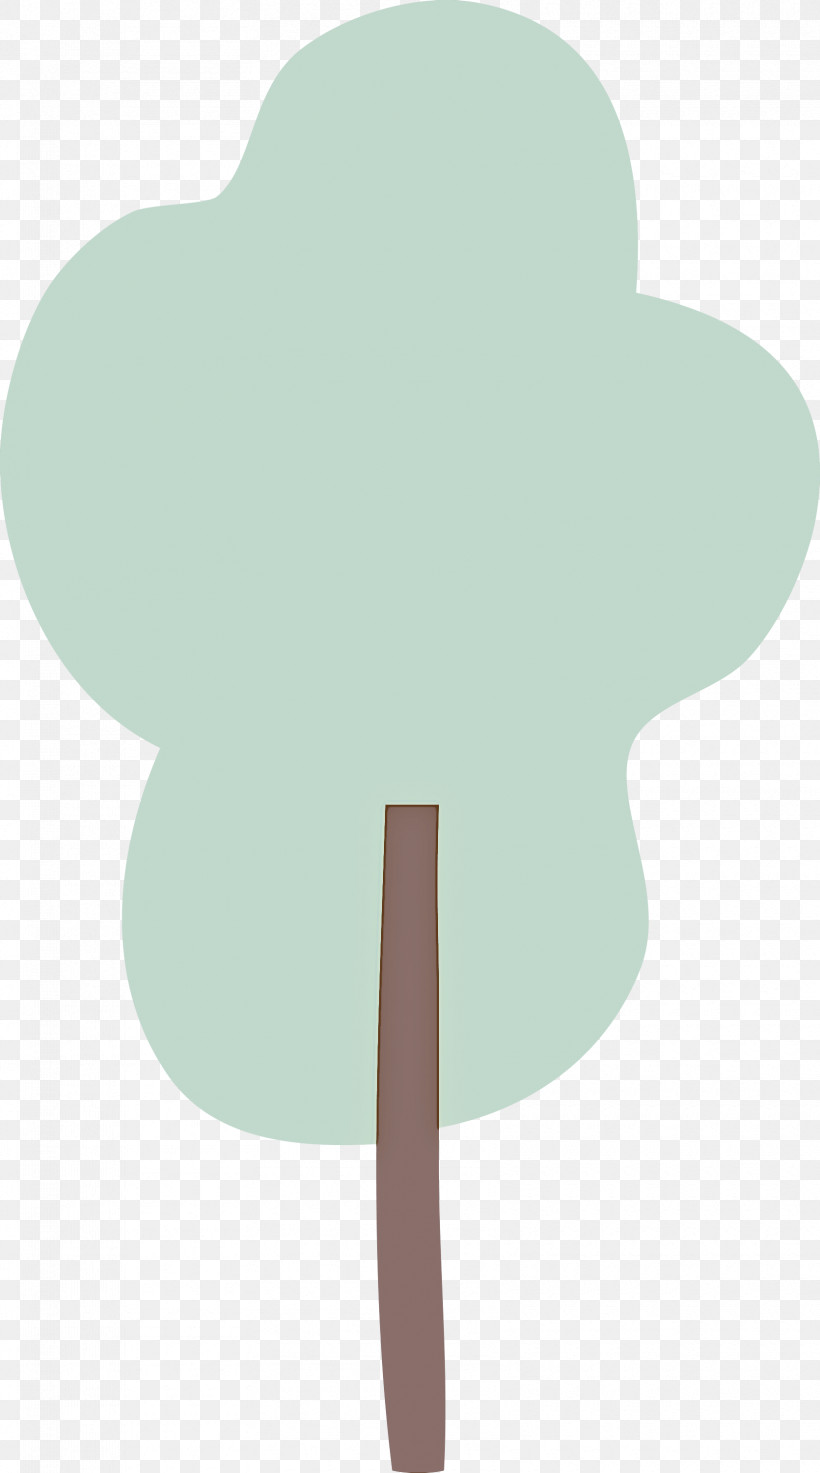 Green Material Property Tree Symbol Plant, PNG, 1670x3000px, Cartoon Tree, Abstract Tree, Frozen Dessert, Green, Material Property Download Free